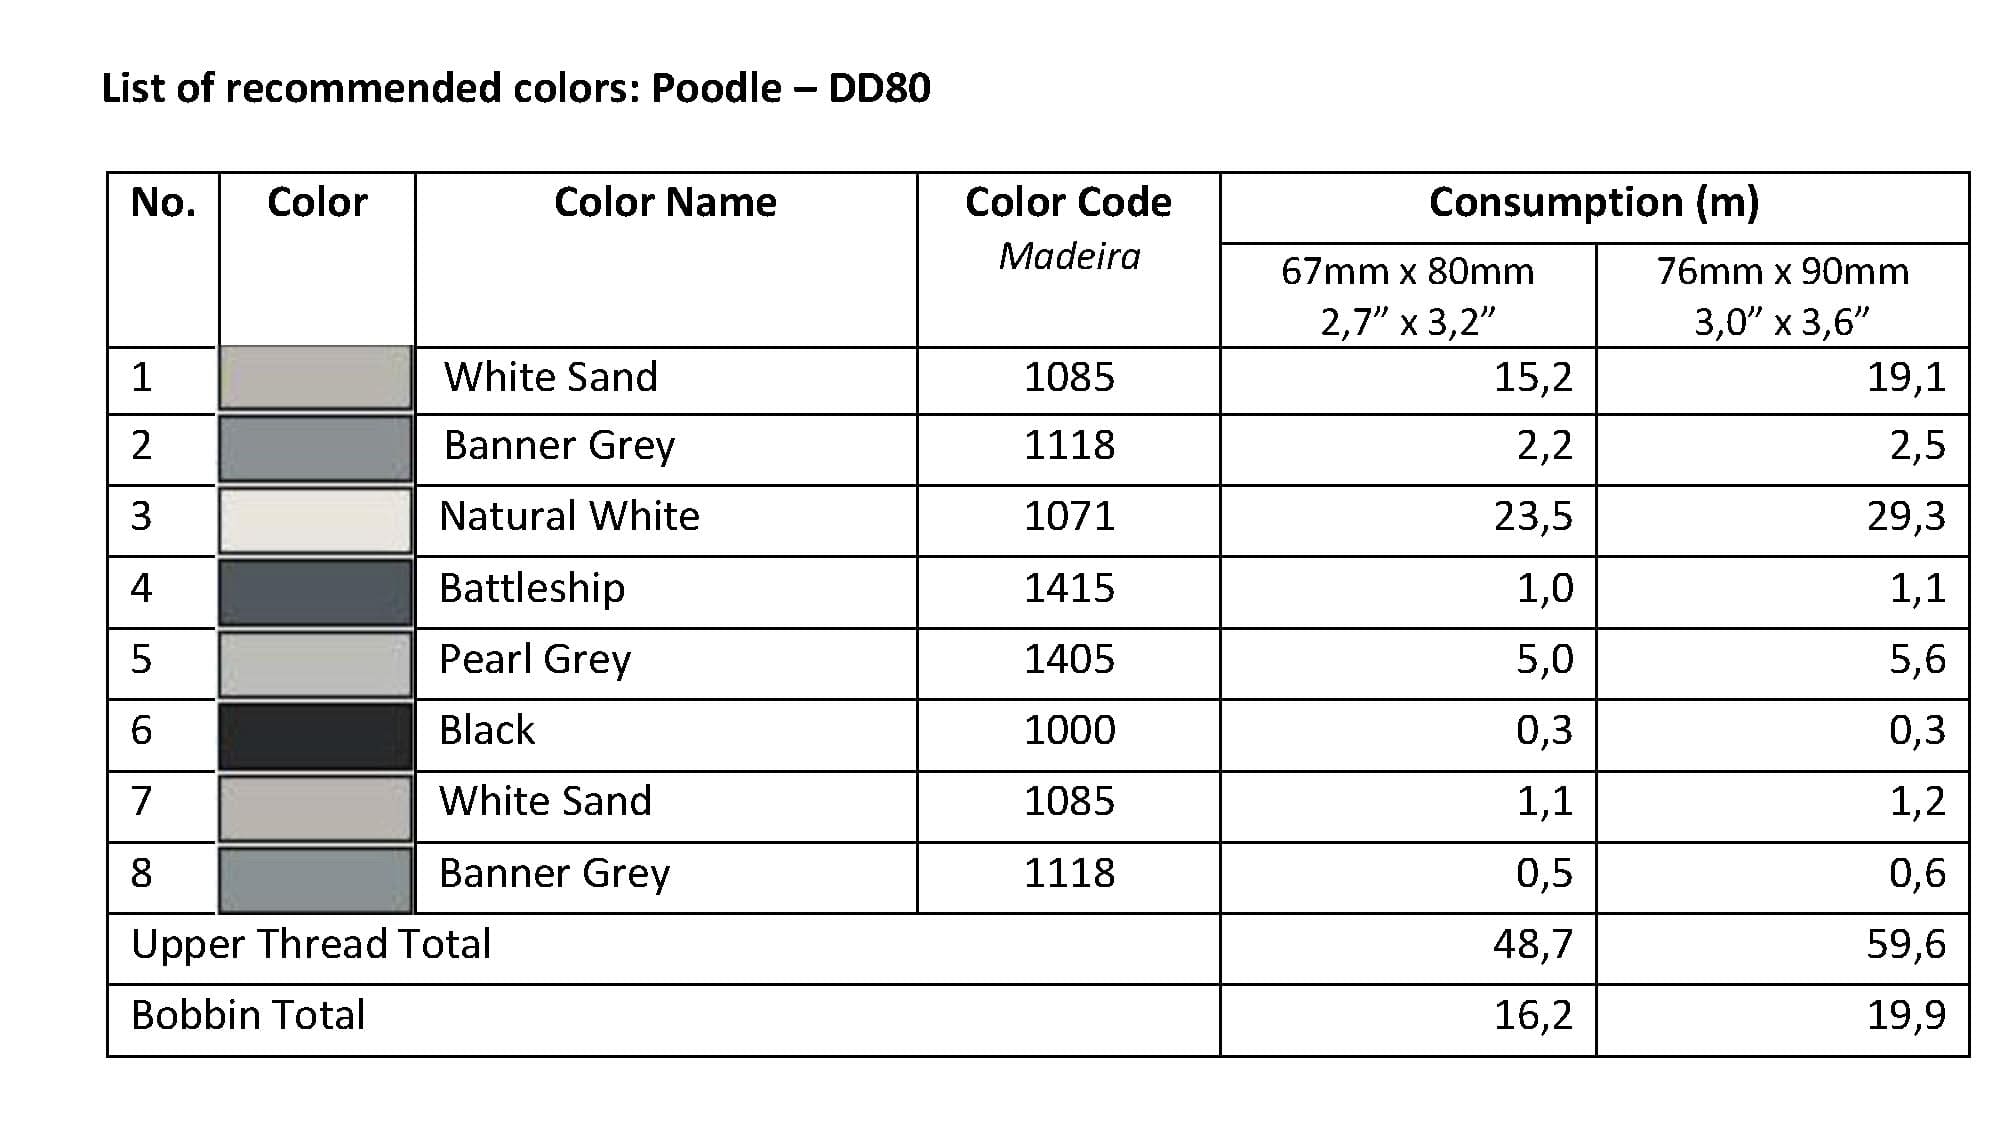 List of Recommended Colors -  Poodle DD80